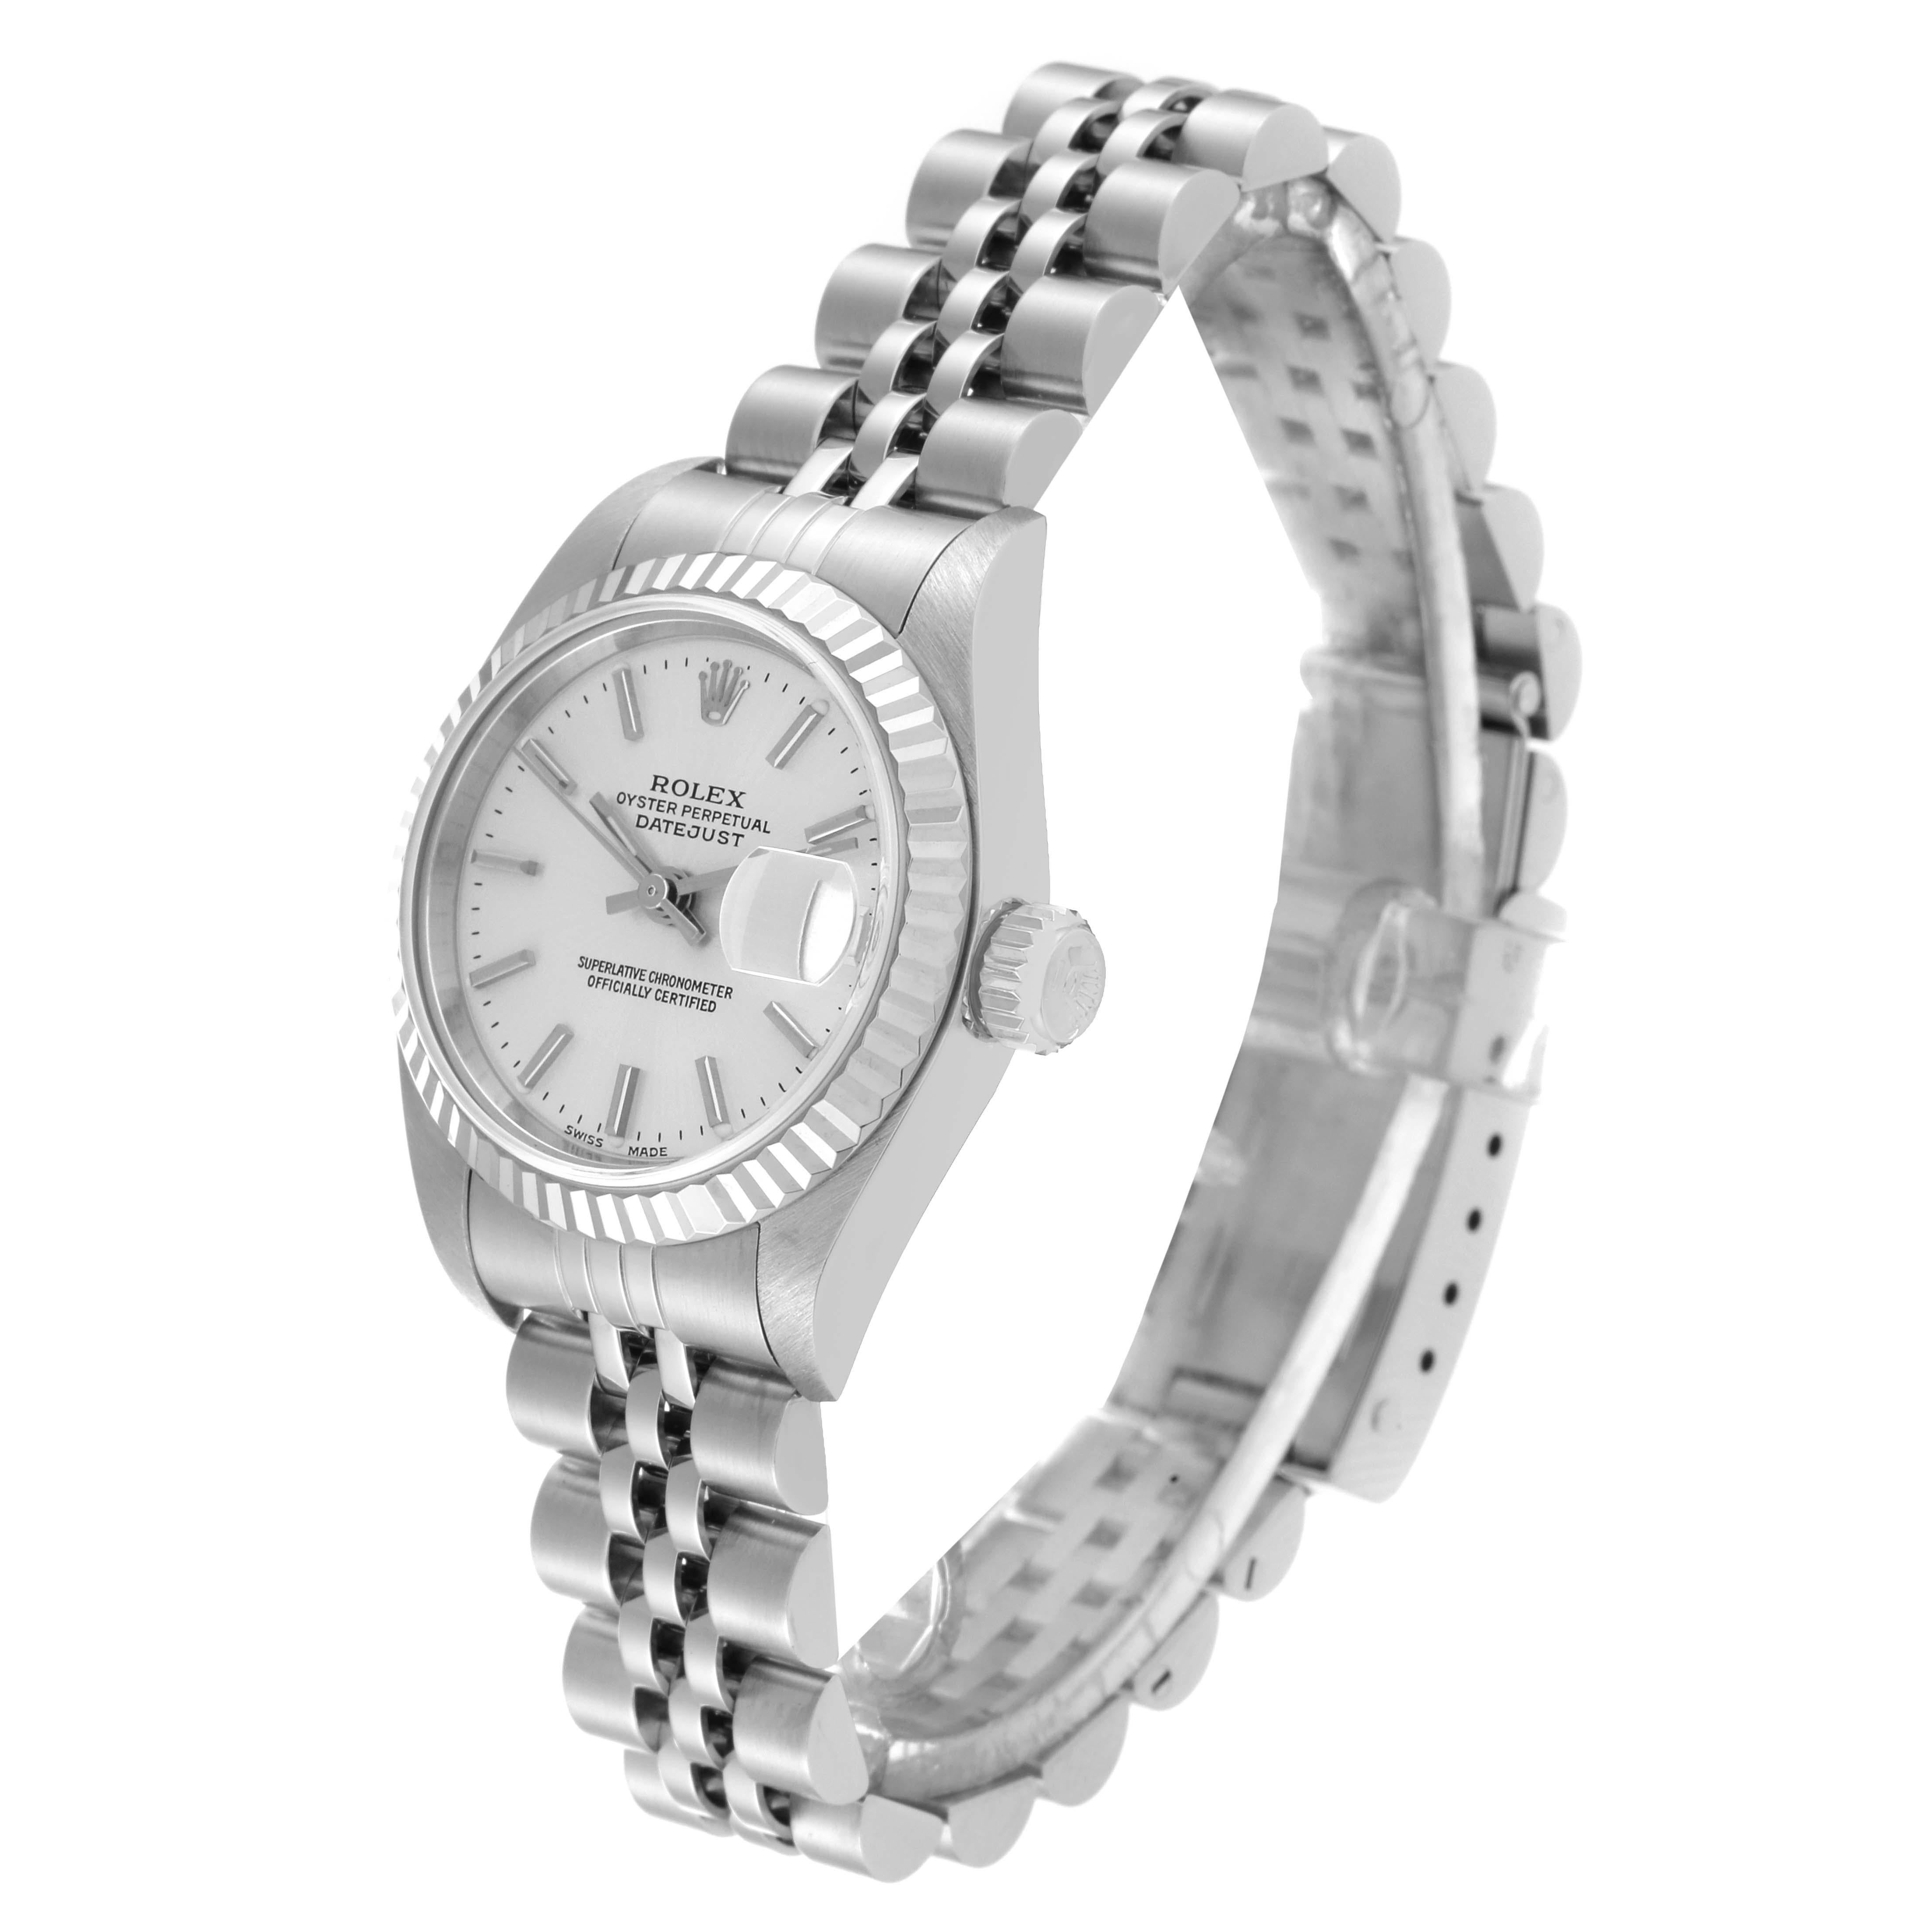 Women's Rolex Datejust 26 Steel White Gold Silver Dial Ladies Watch 79174 Box Papers